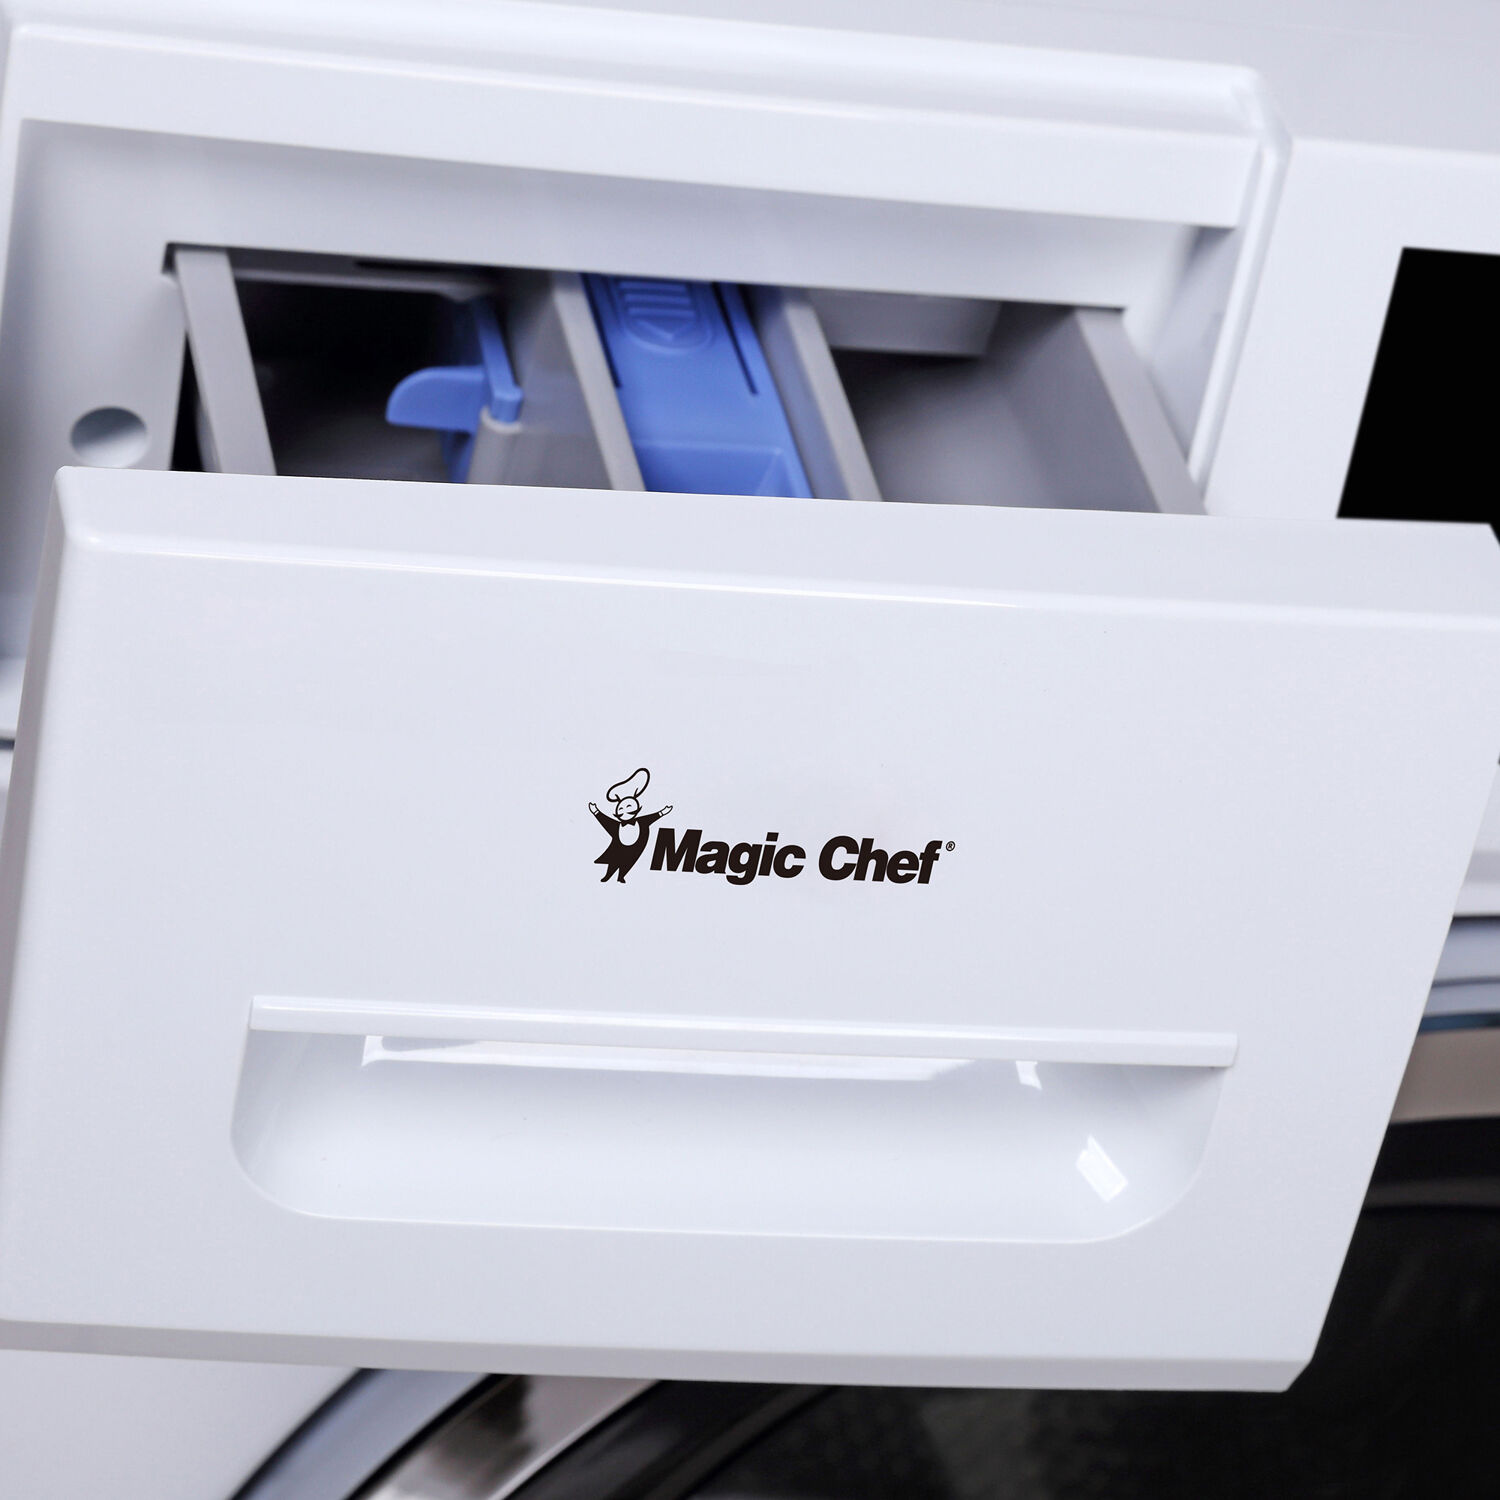 Magic Chef Brand 24 in. 2.7 Cu. ft. Front Load Washer in White MCSFLW27W, 23.4 in L x 33.5 in H x 23.4 in D, 160.9 lbs. - image 3 of 8